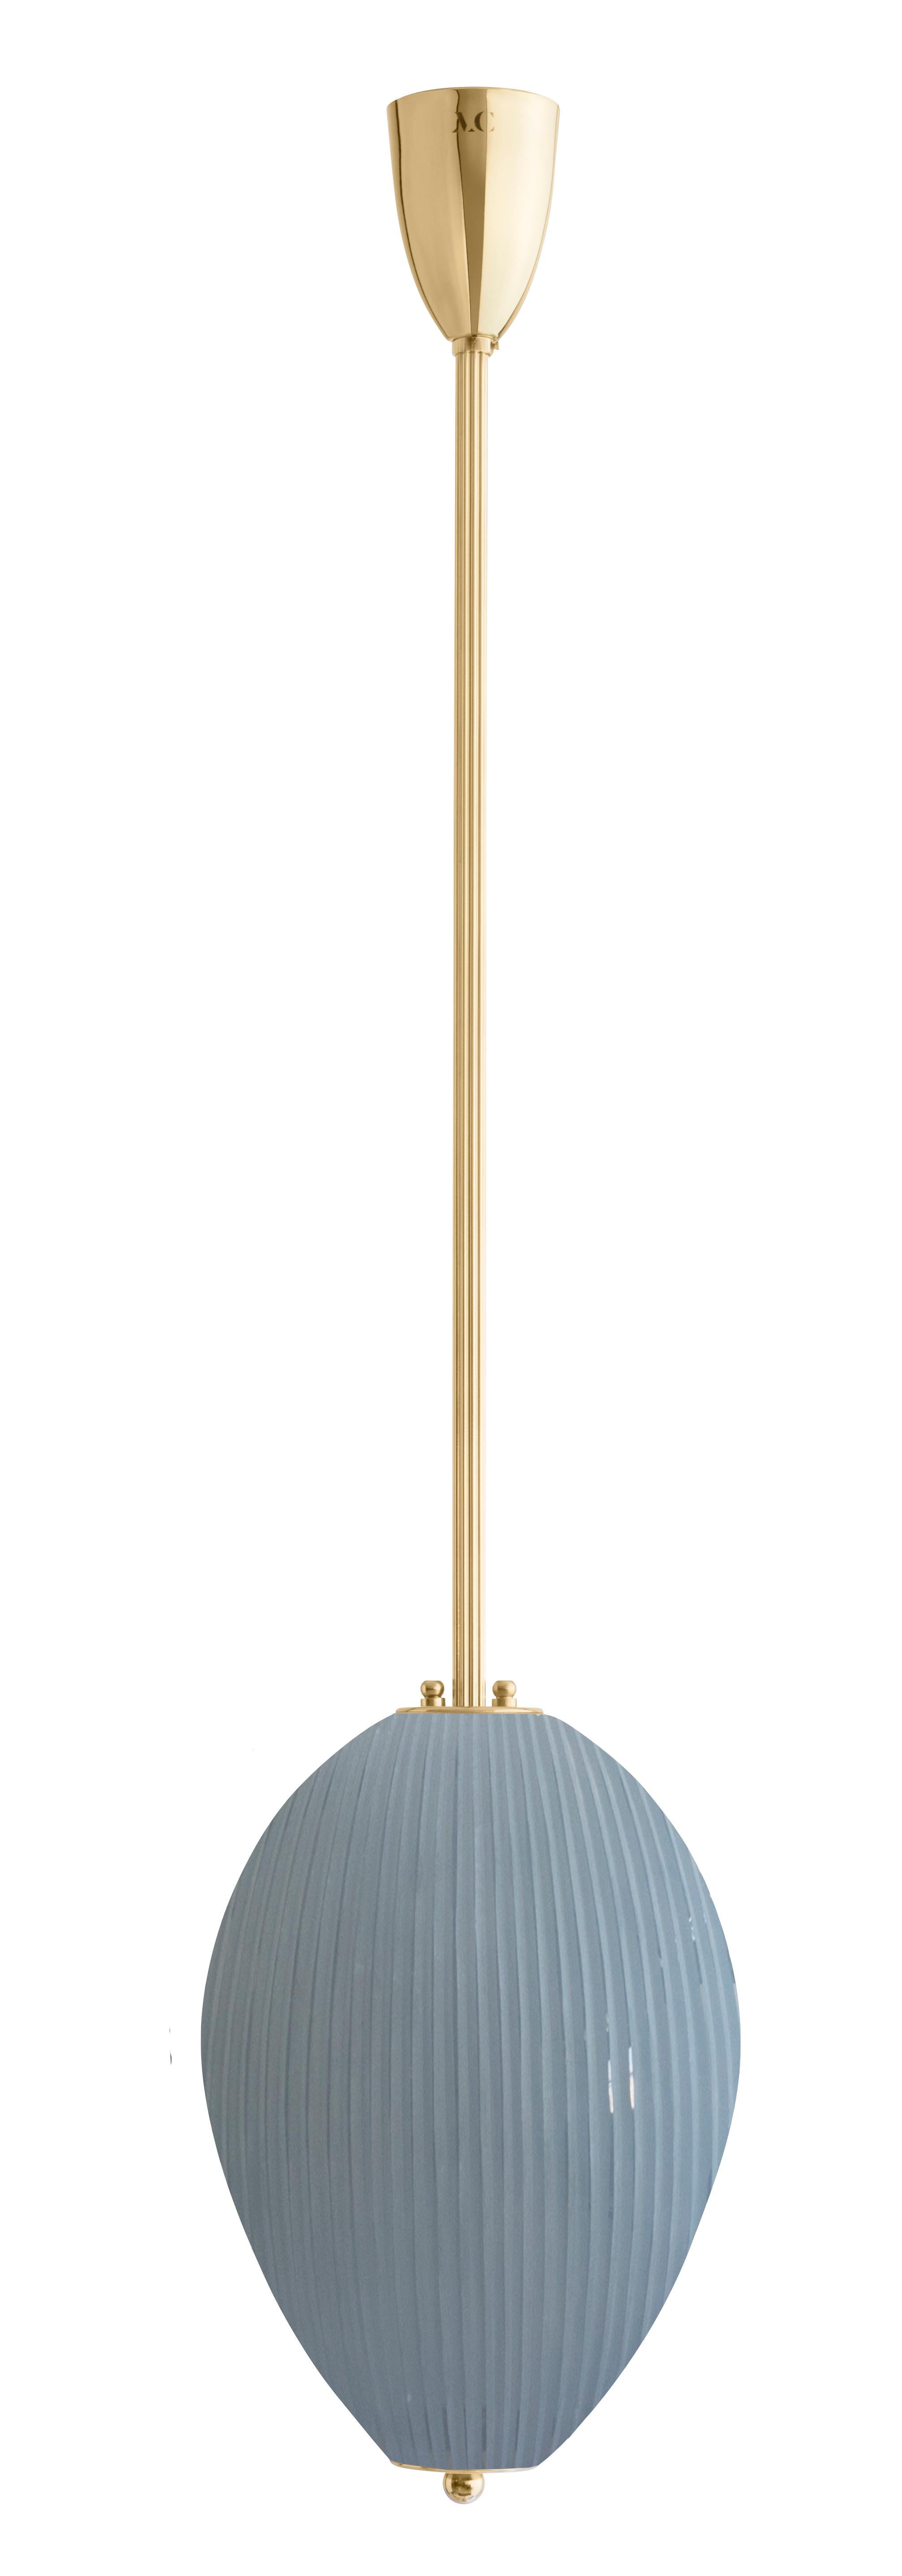 Pendant China 10 by Magic Circus Editions
Dimensions: H 90 x W 32 x D 32 cm, also available in H 110, 130, 150, 175, 190 cm
Materials: Brass, mouth blown glass sculpted with a diamond saw
Colour: opal grey

Available finishes: Brass,